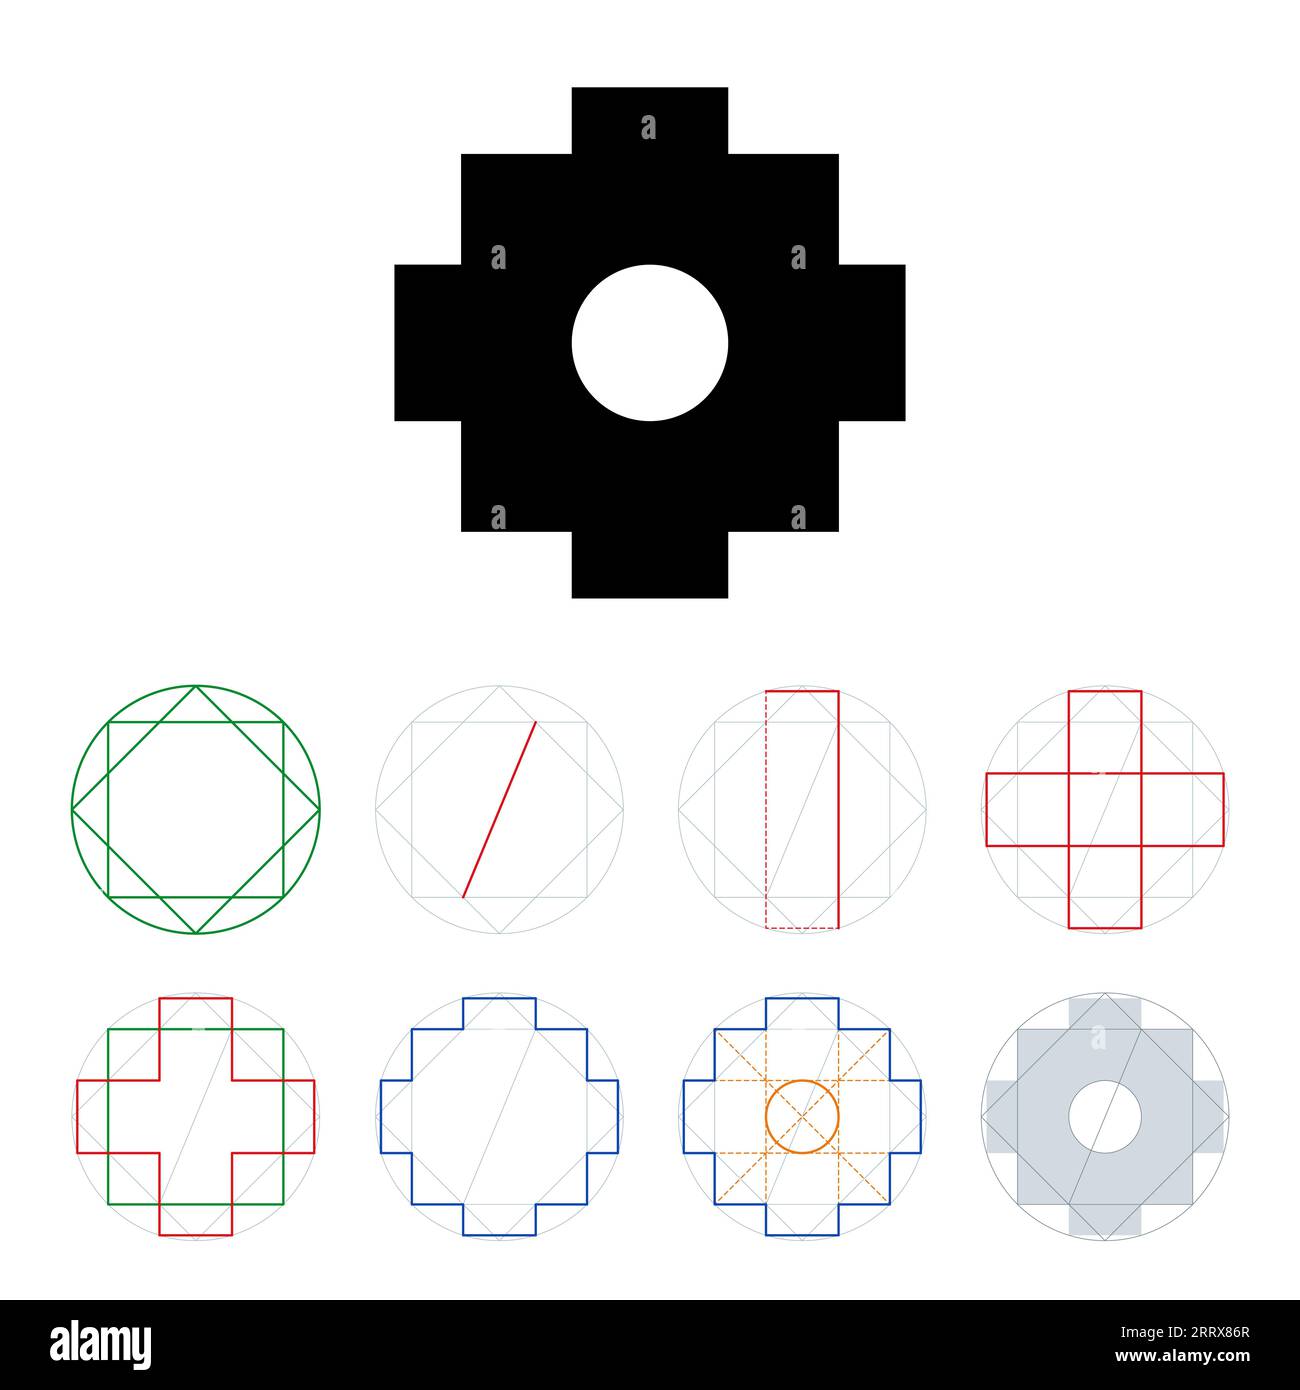 Construction of a Chakana, Andean cross and stepped cross motif. Step by step instruction. Inca symbol, used for architectural design and meditation. Stock Photo